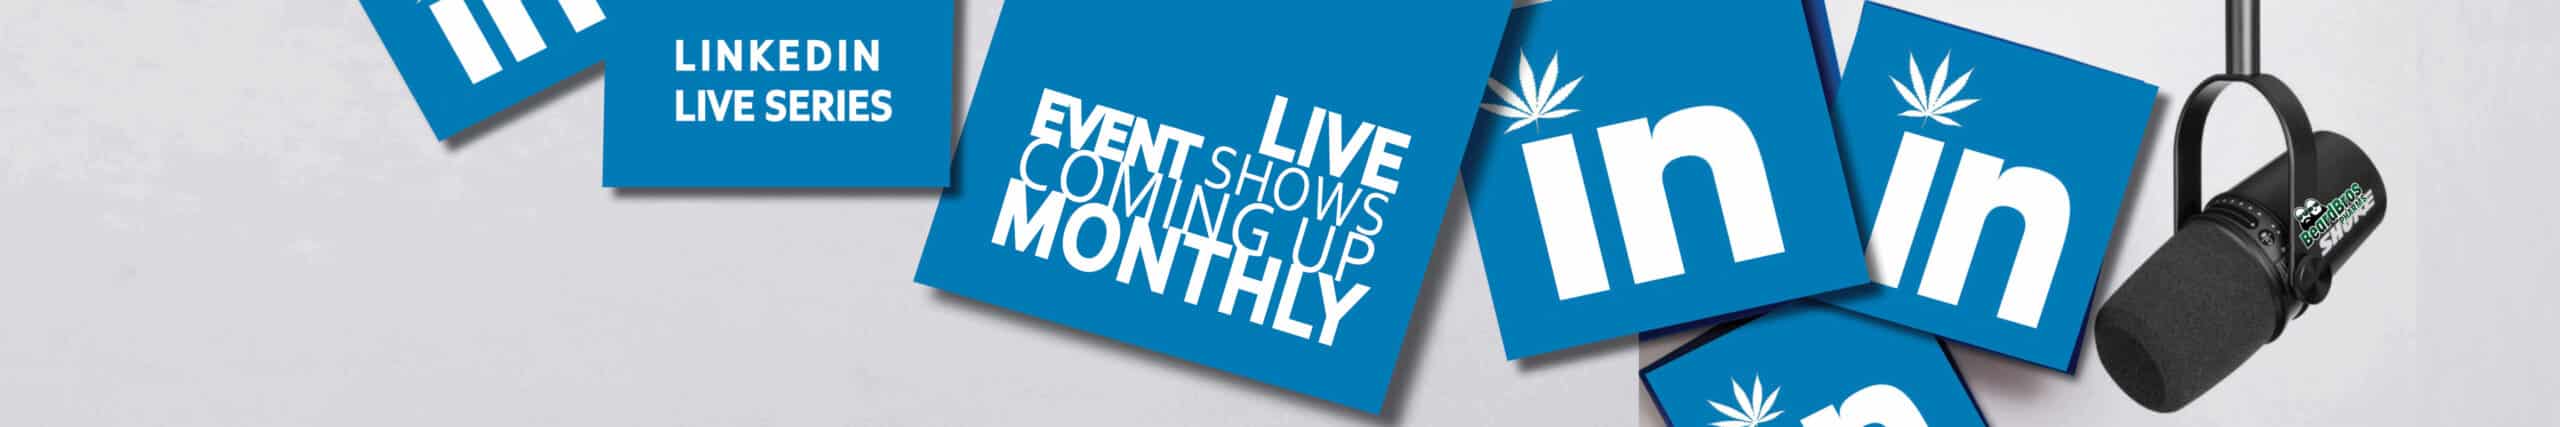 LIVE EVENT LINKEDIN BANNER FOR EVENTS PAGE